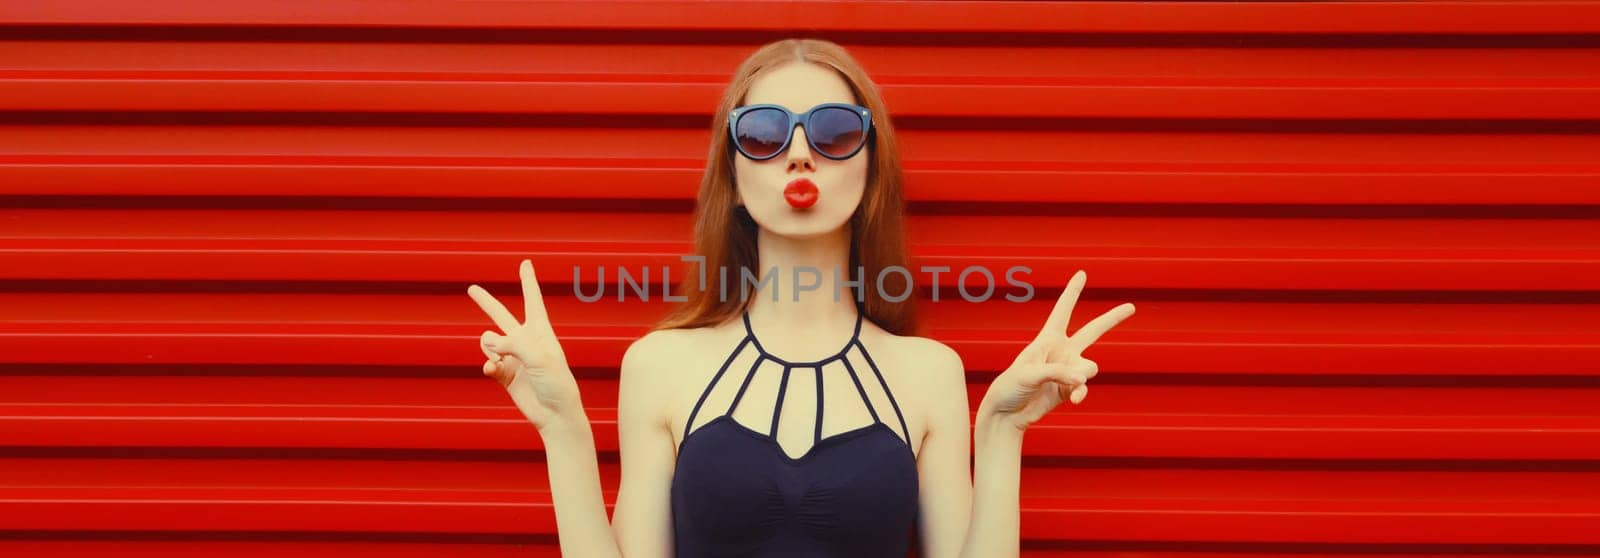 Portrait of stylish caucasian young woman model blowing a kiss wearing in black outfit, sunglasses on red background